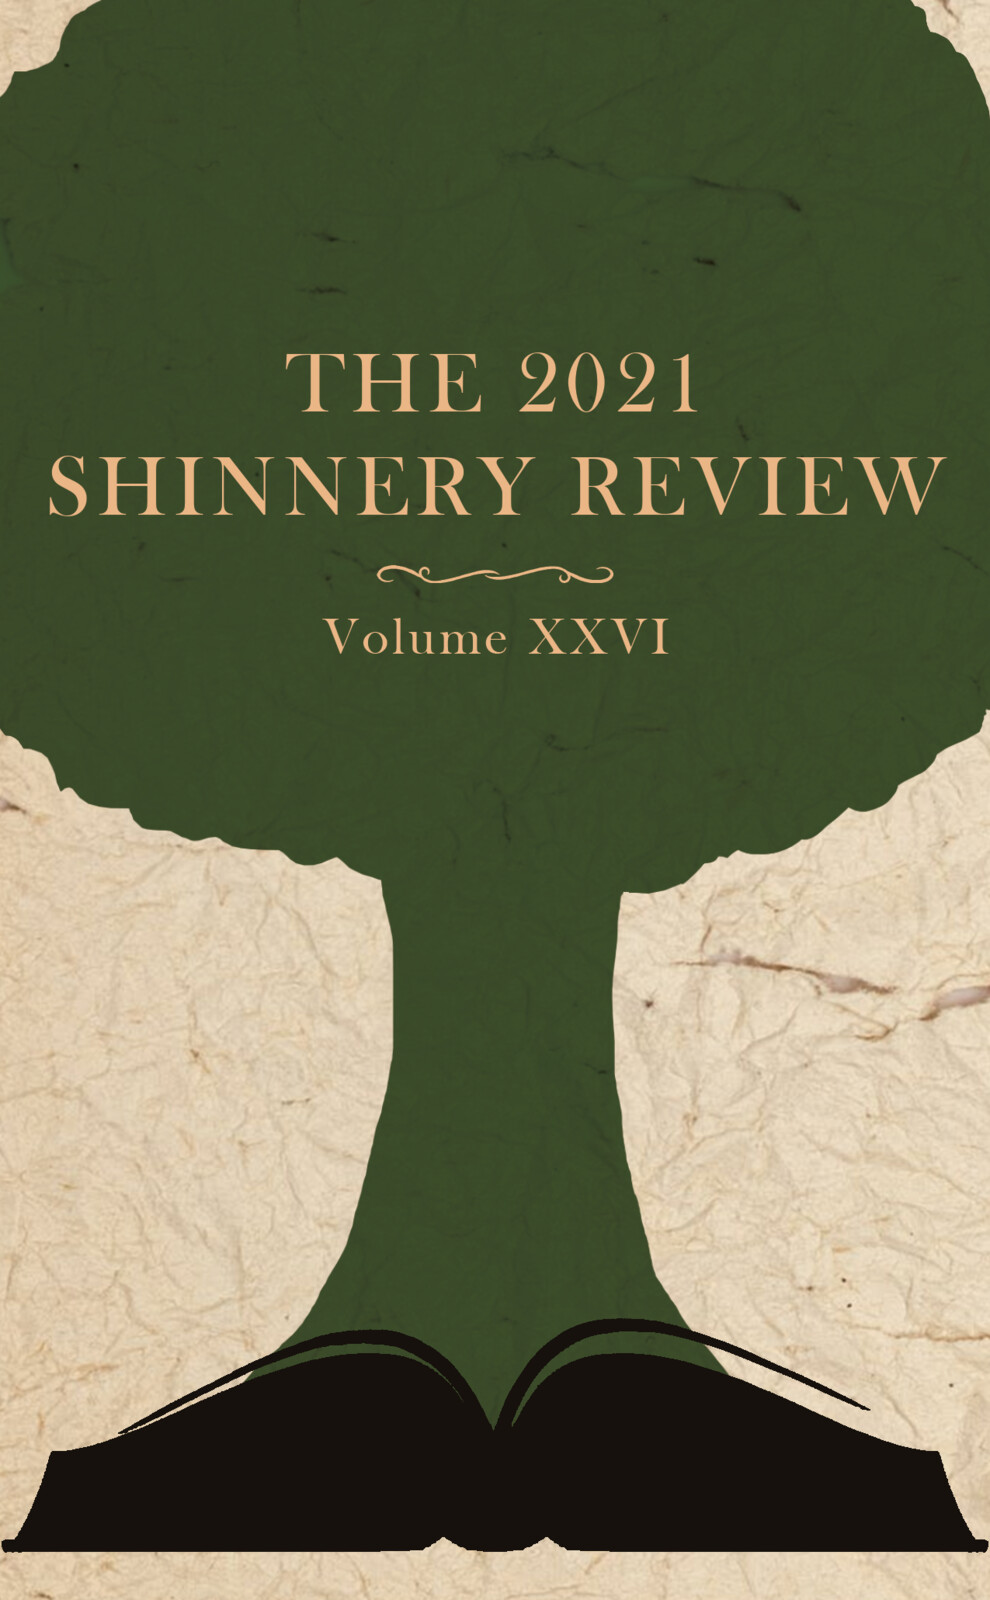 The Shinnery Review - Commission Work